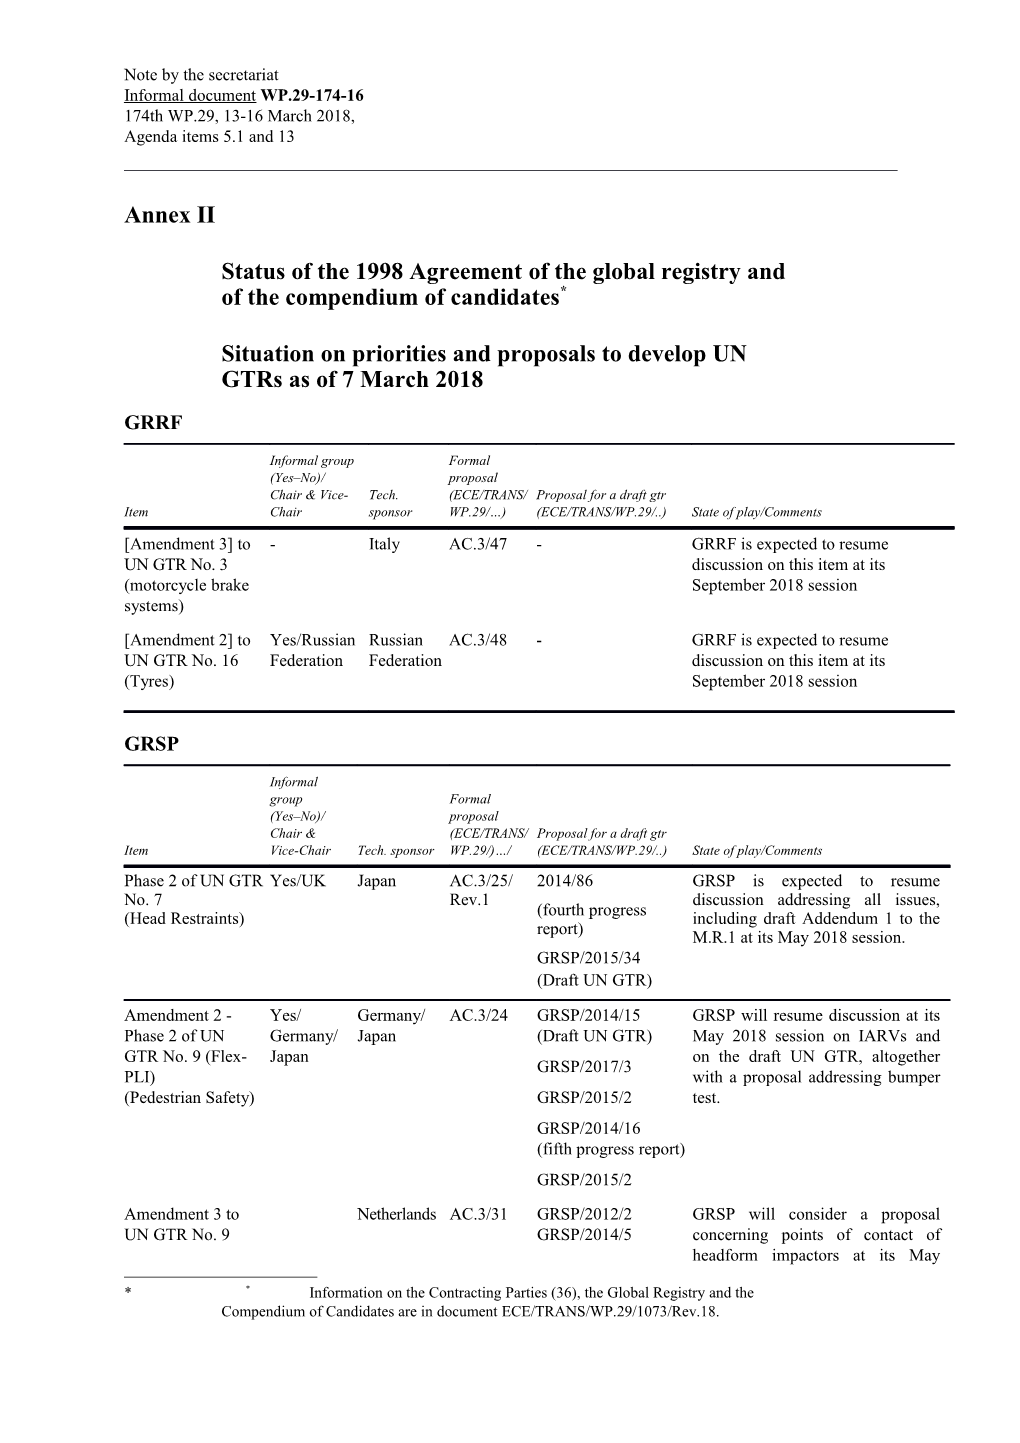 Status of the 1998 Agreement of the Global Registry and of the Compendium of Candidates *